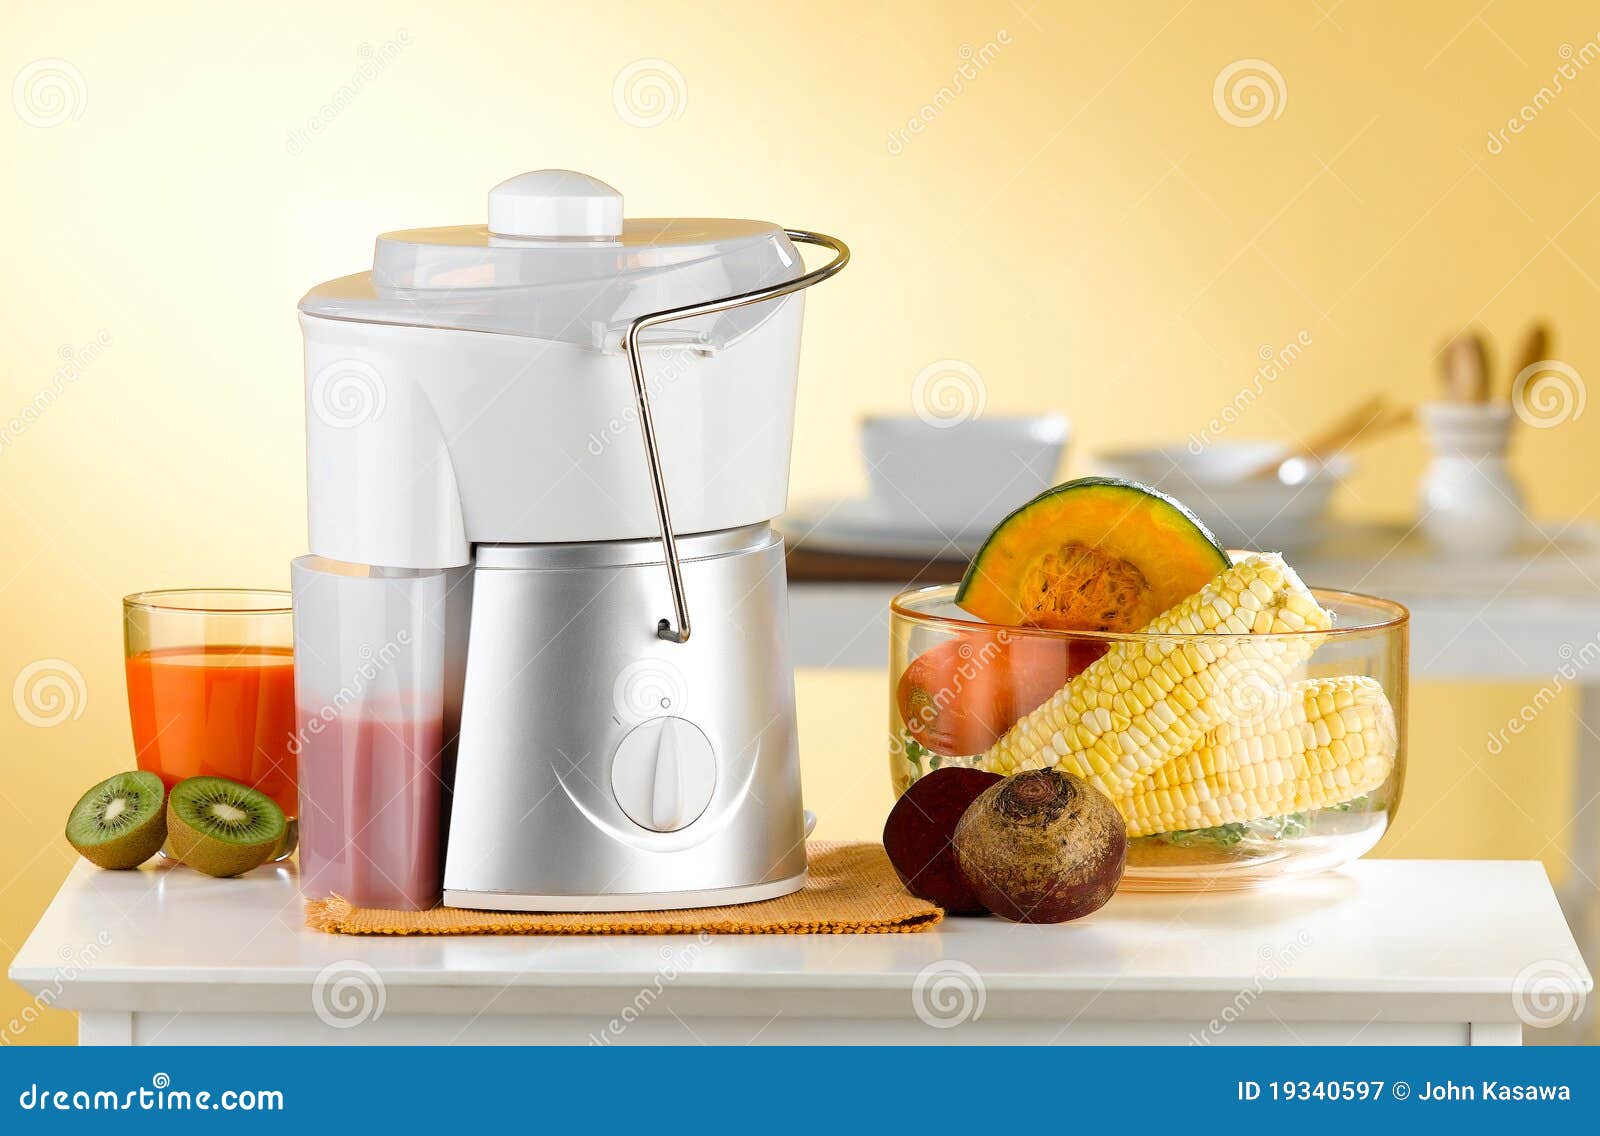 Buy the Fruit and Vegetable Juice Extractor, JE2200B